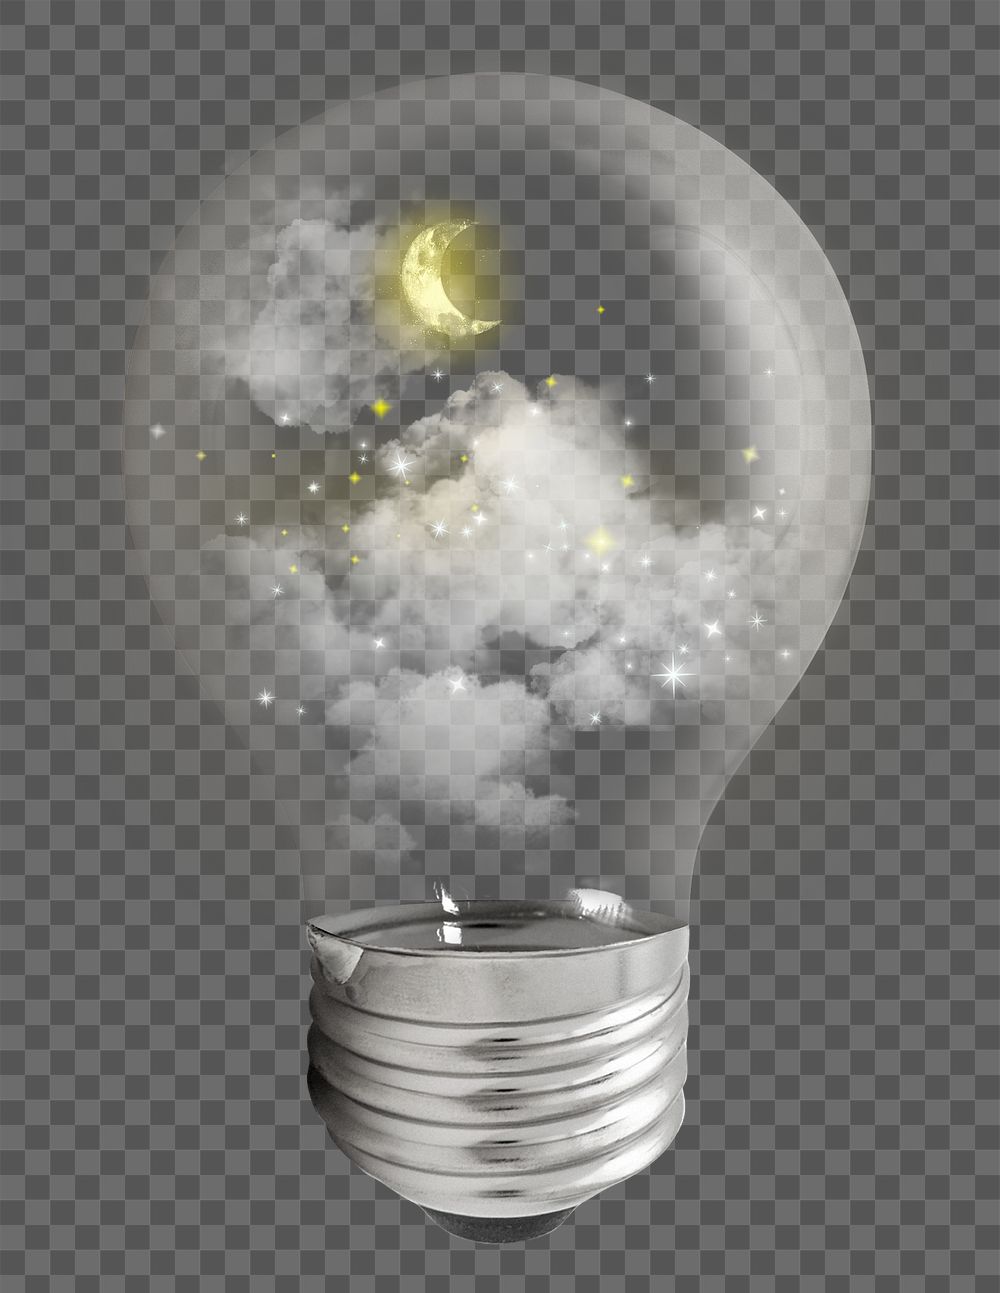 Aesthetic night  png sky sticker, light bulb weather collage on transparent background